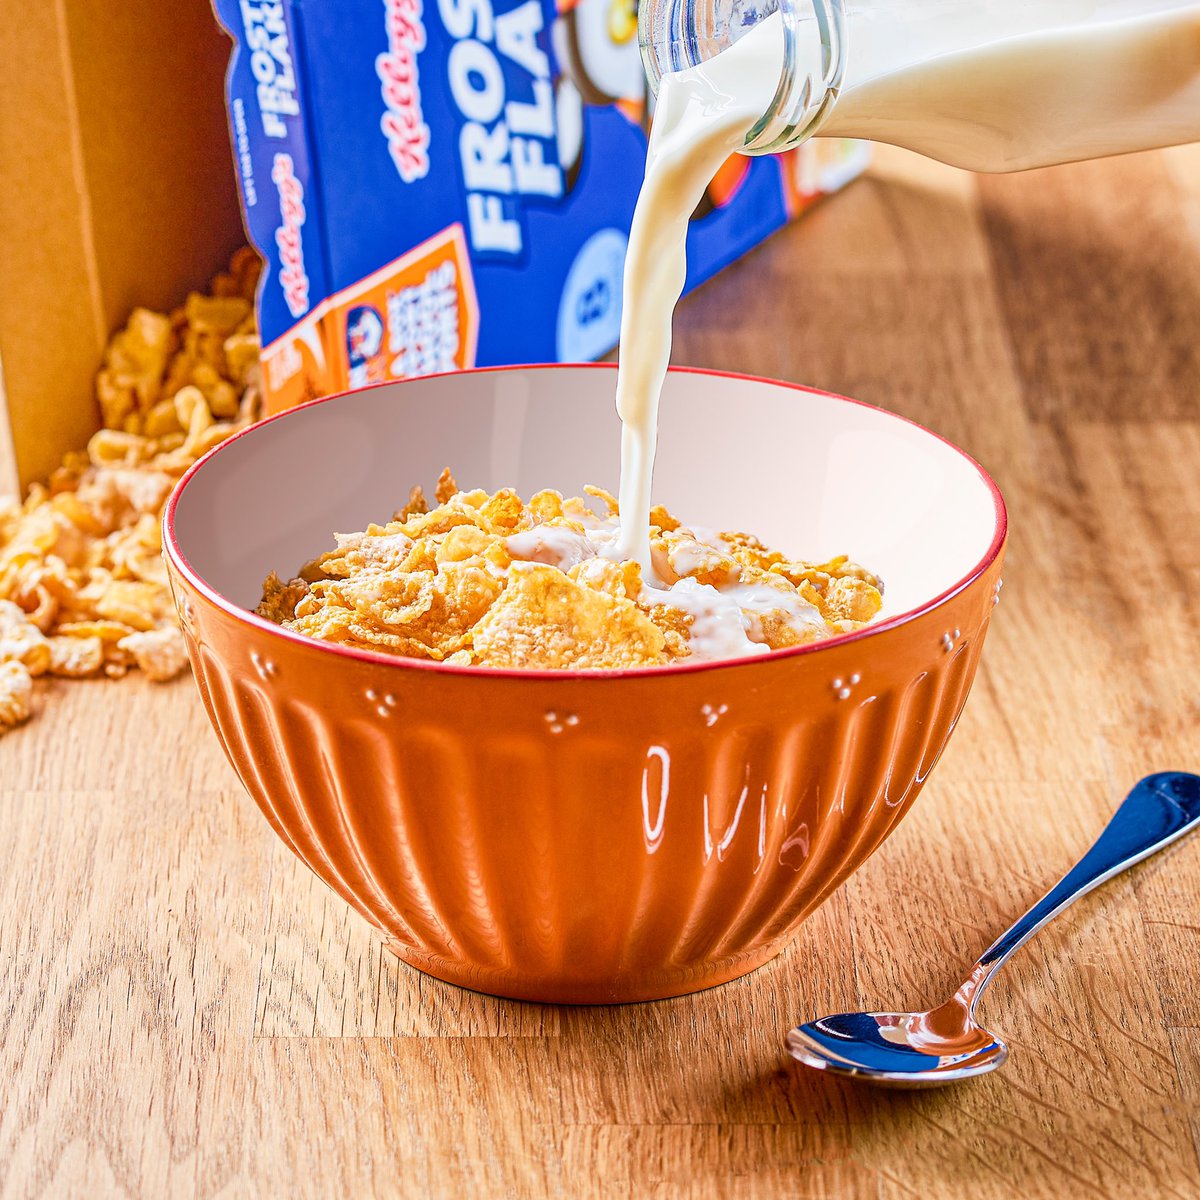 Milk or cereal first? We can’t make up our mind